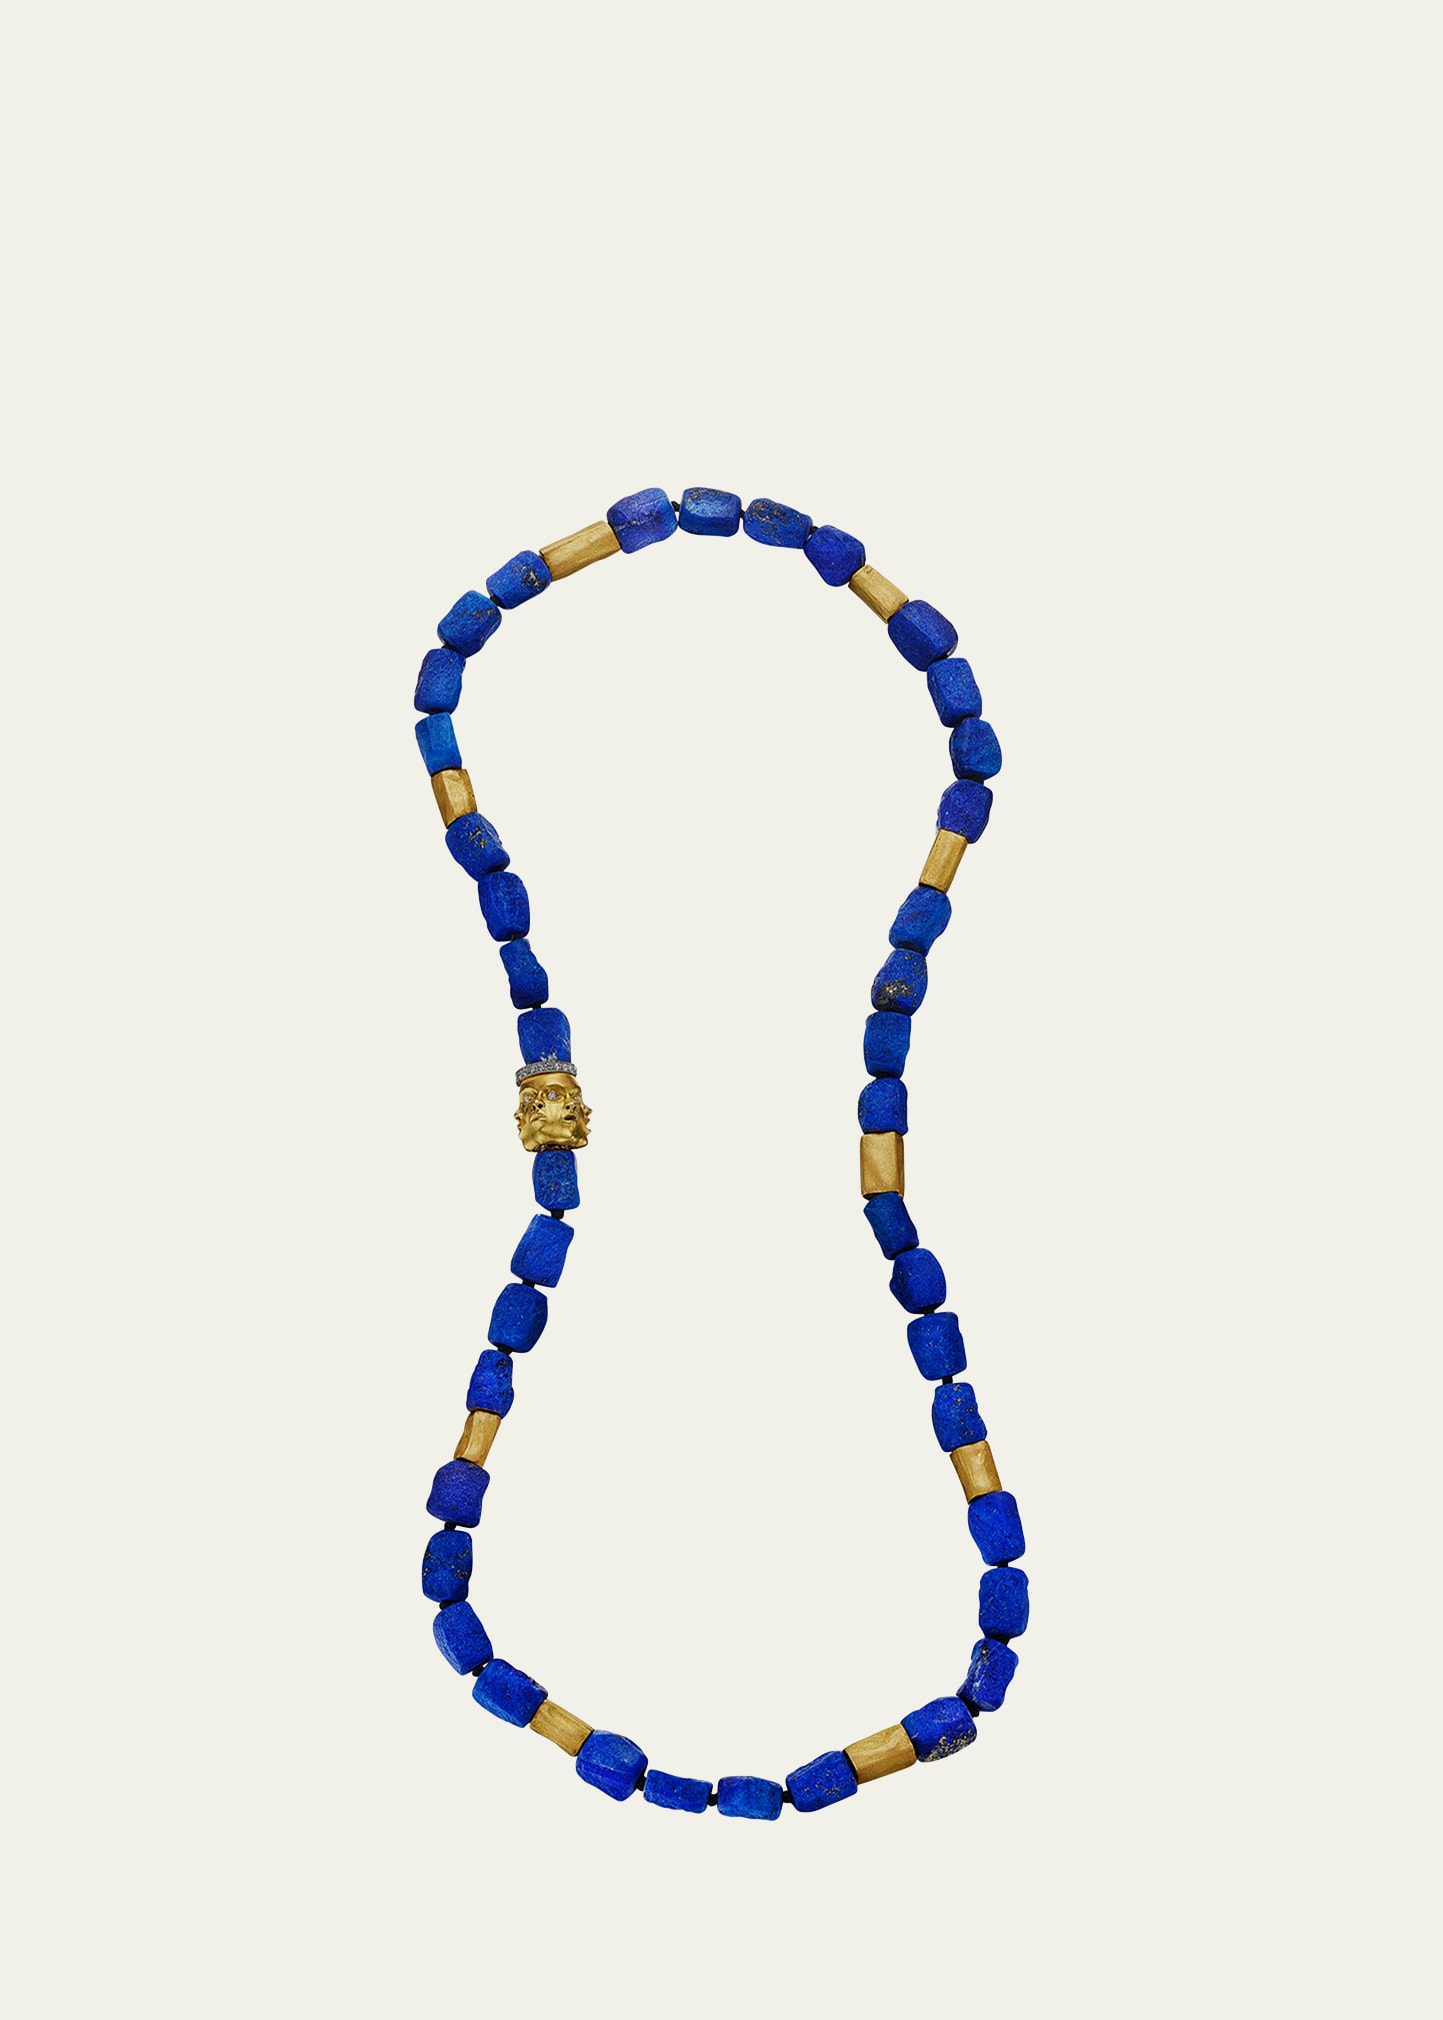 Anthony Lent Lapis Emotions Bead Necklace in 18k Yellow Gold and Diamonds